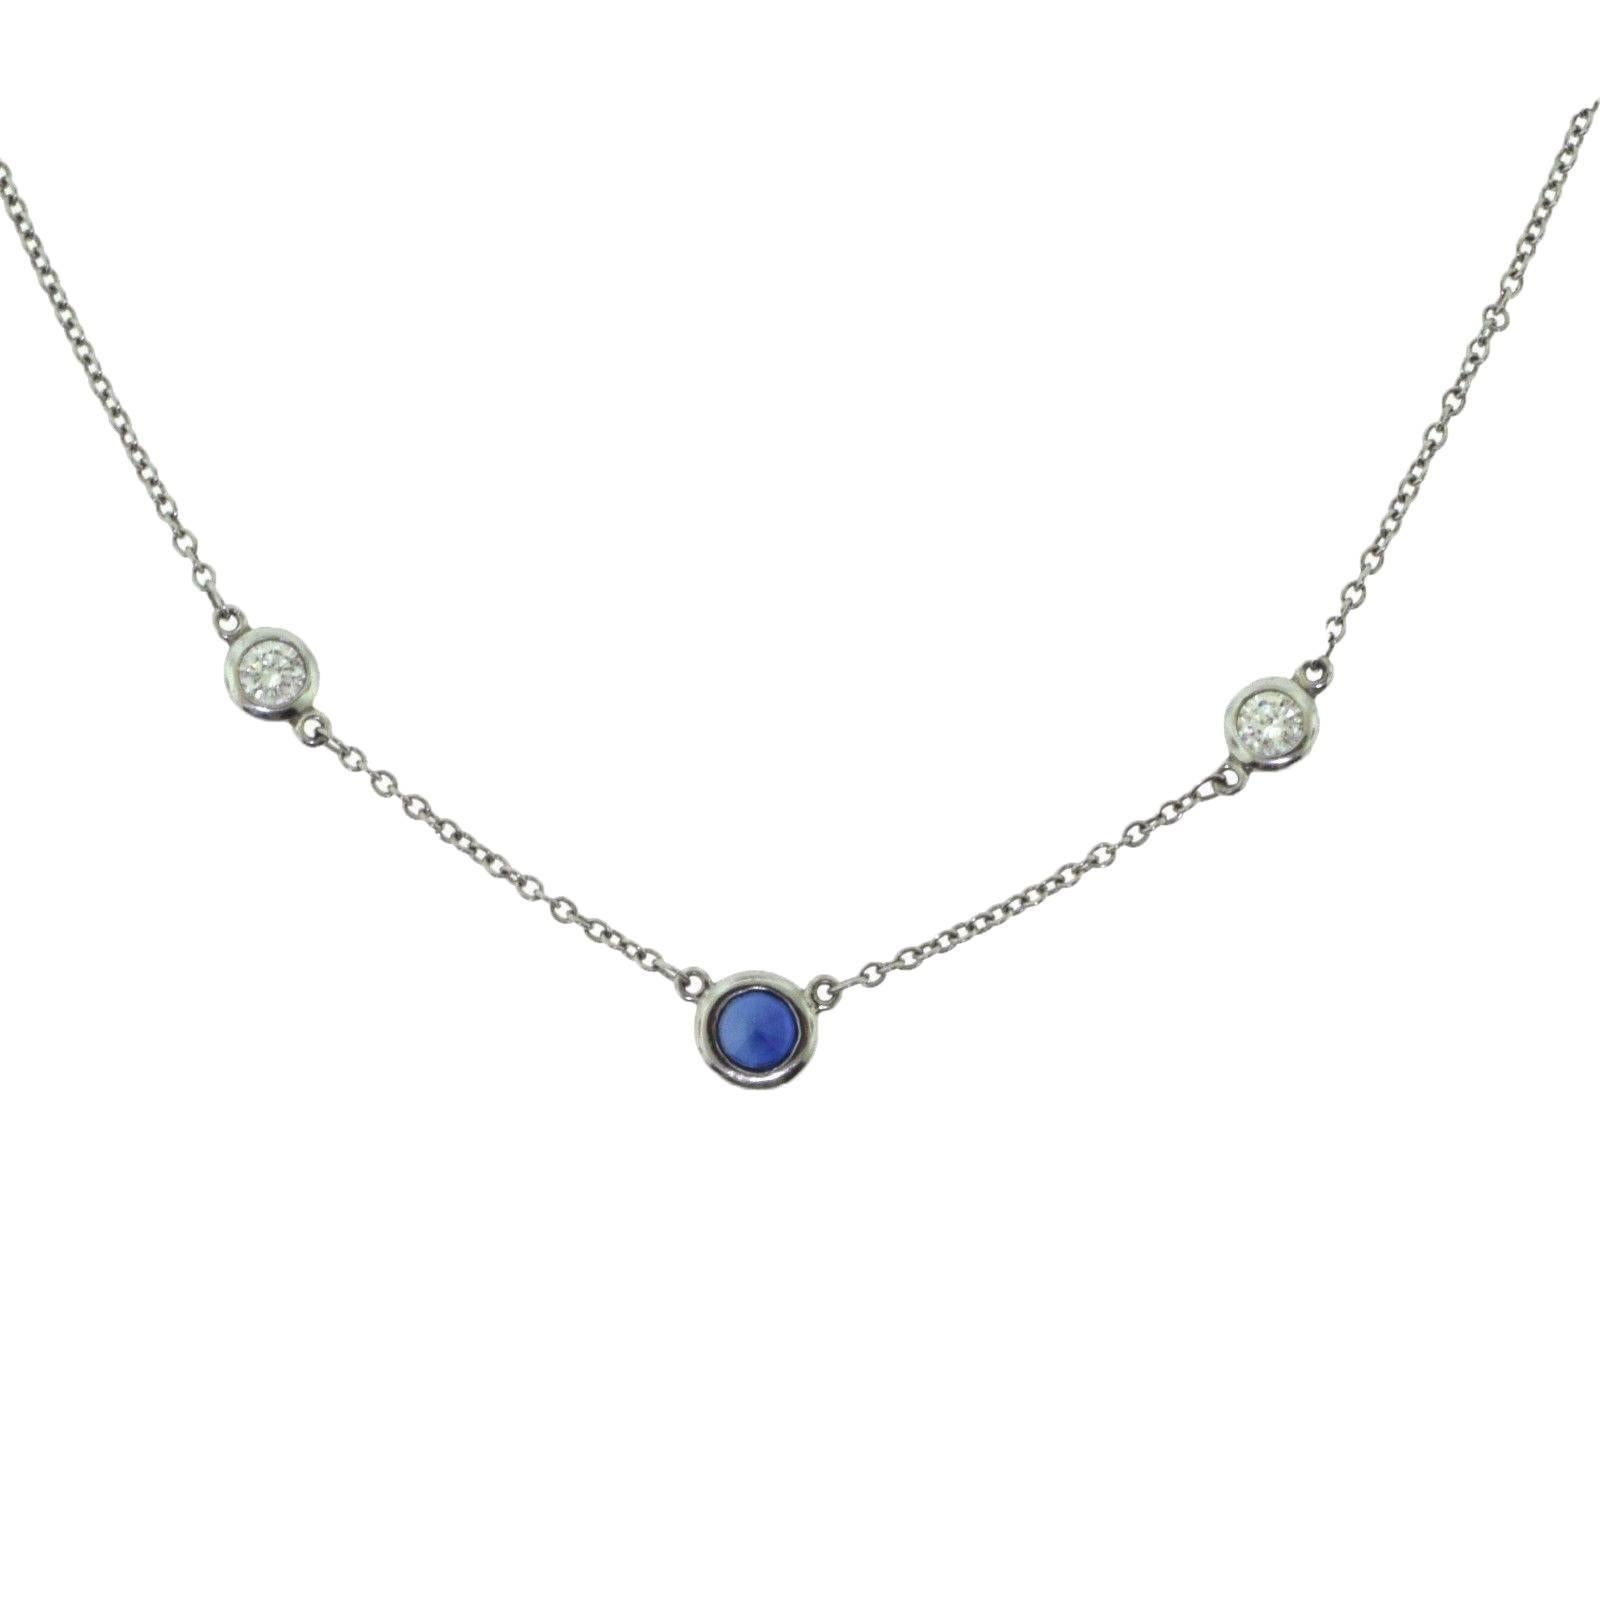 Tiffany & Co. Elsa Peretti Color by the Yard Diamond and Sapphire Necklace For Sale